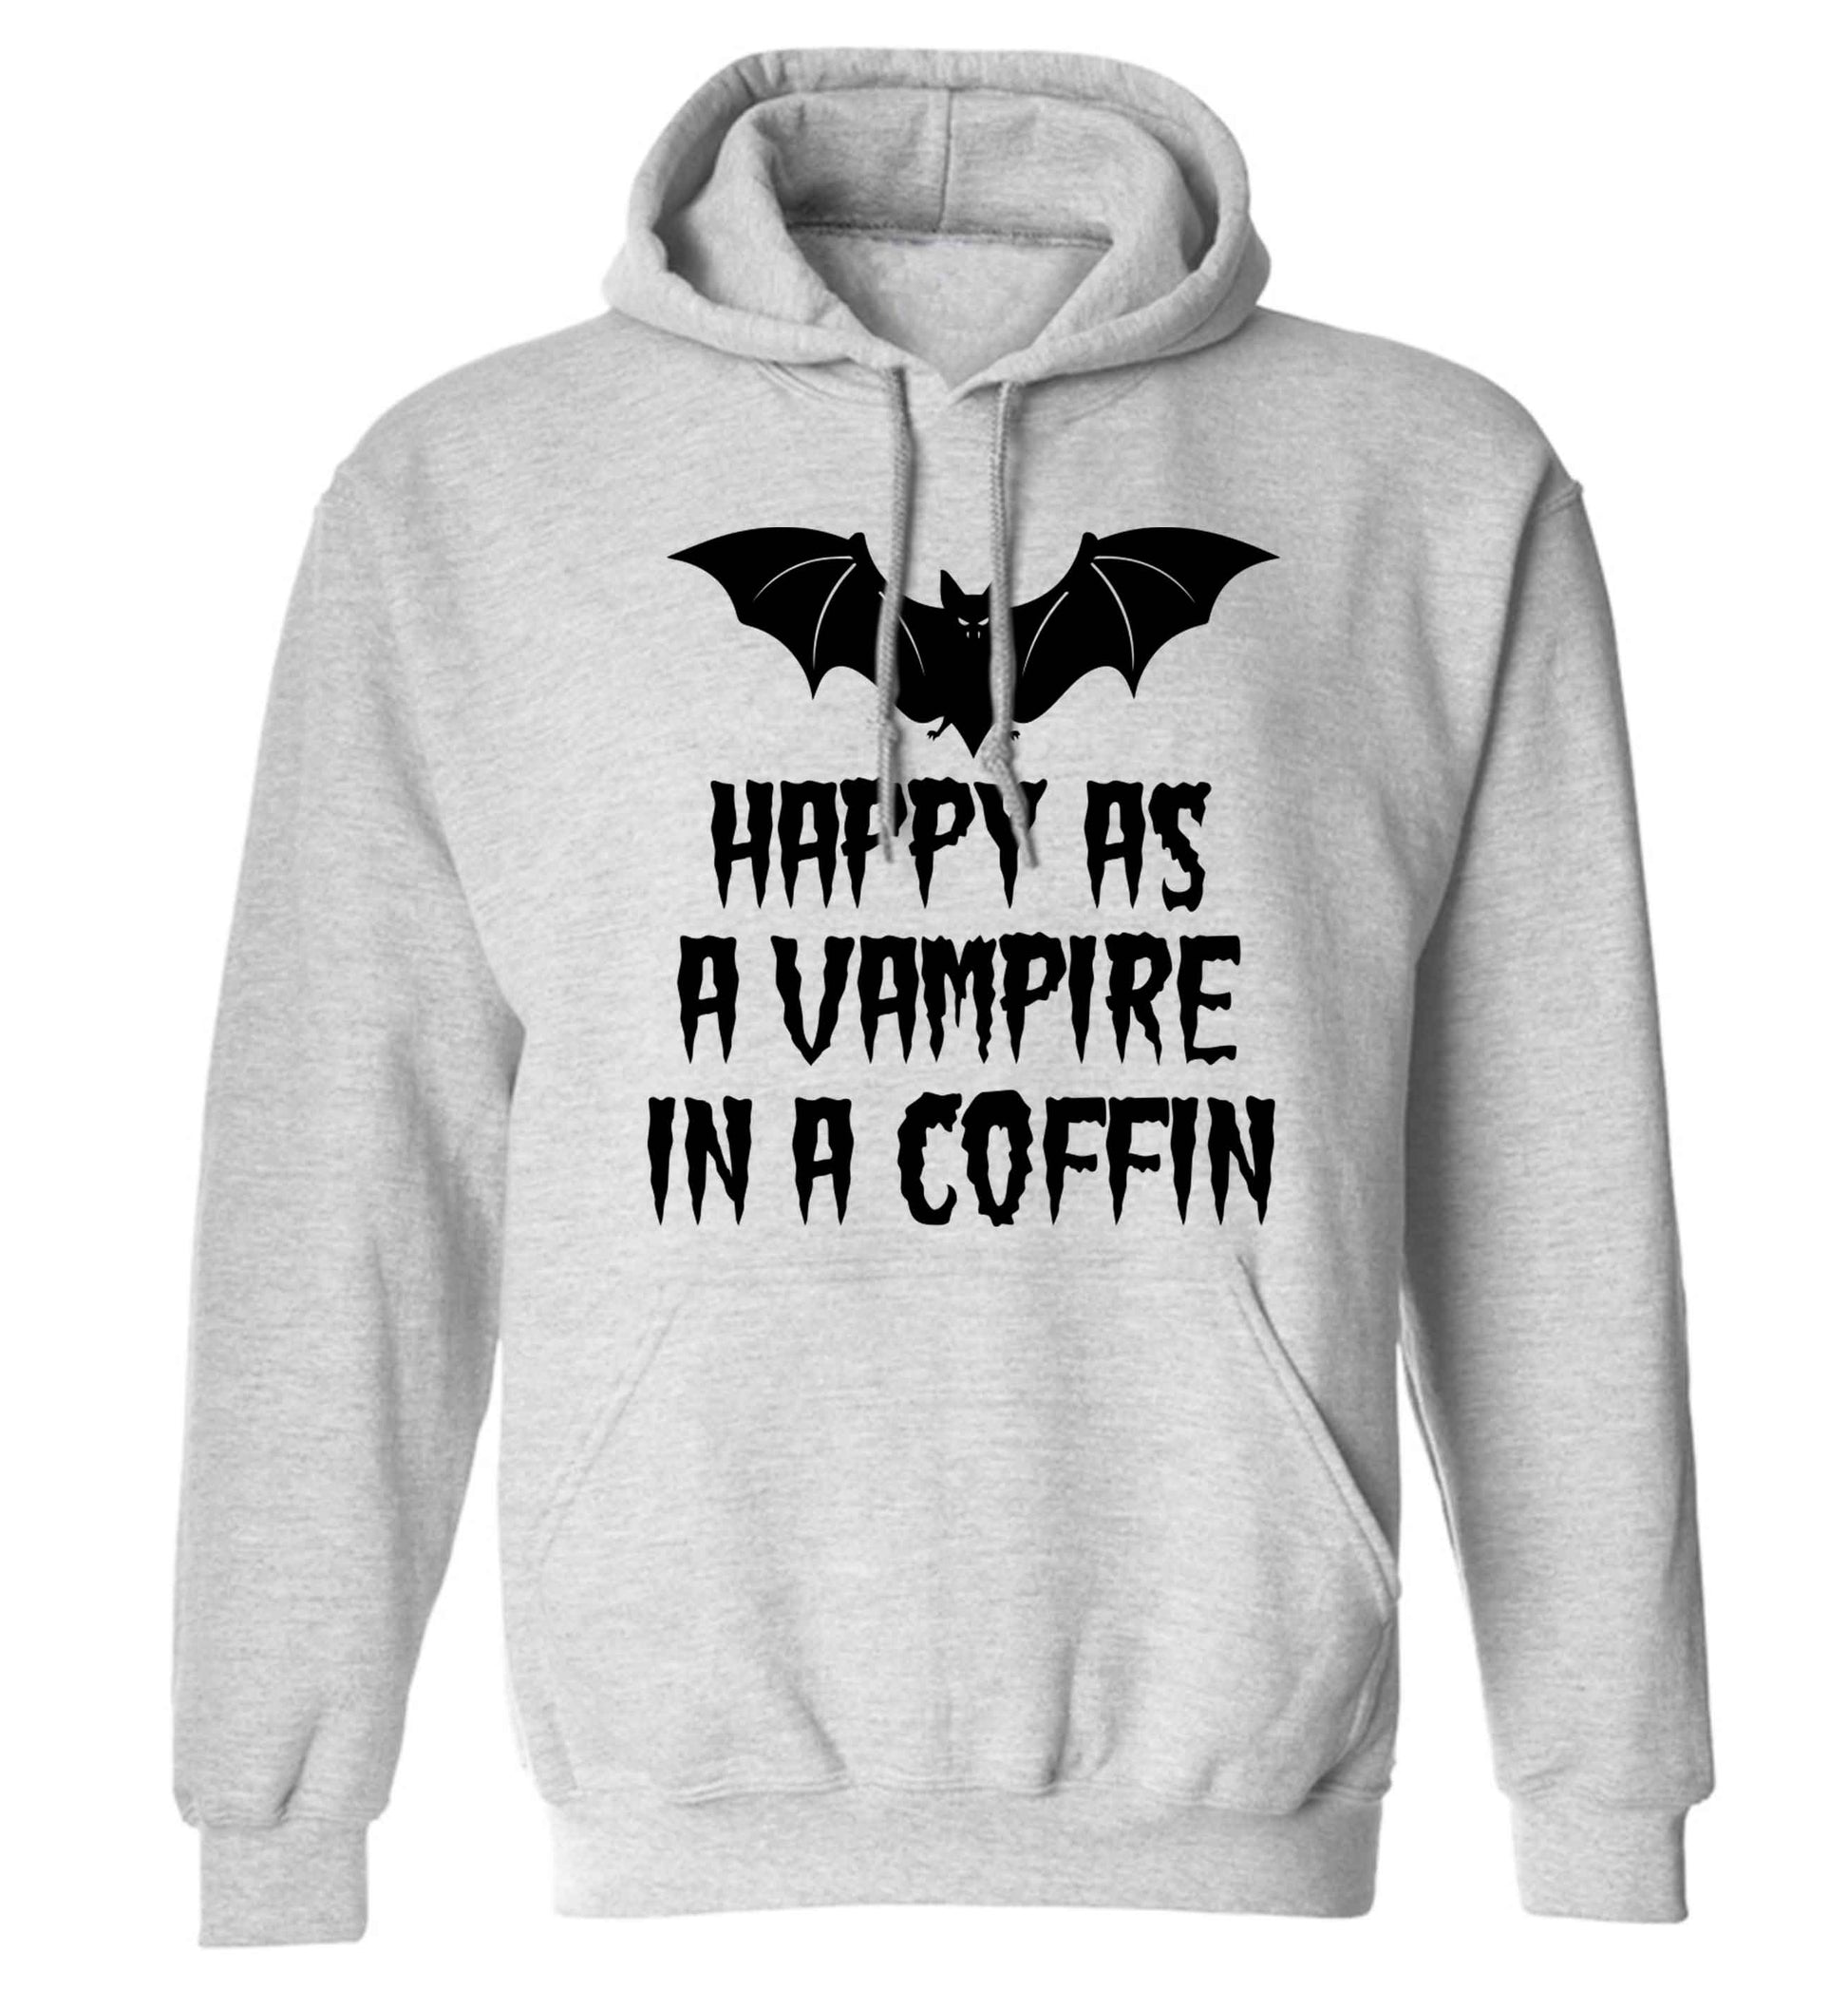 Happy as a vampire in a coffin adults unisex grey hoodie 2XL